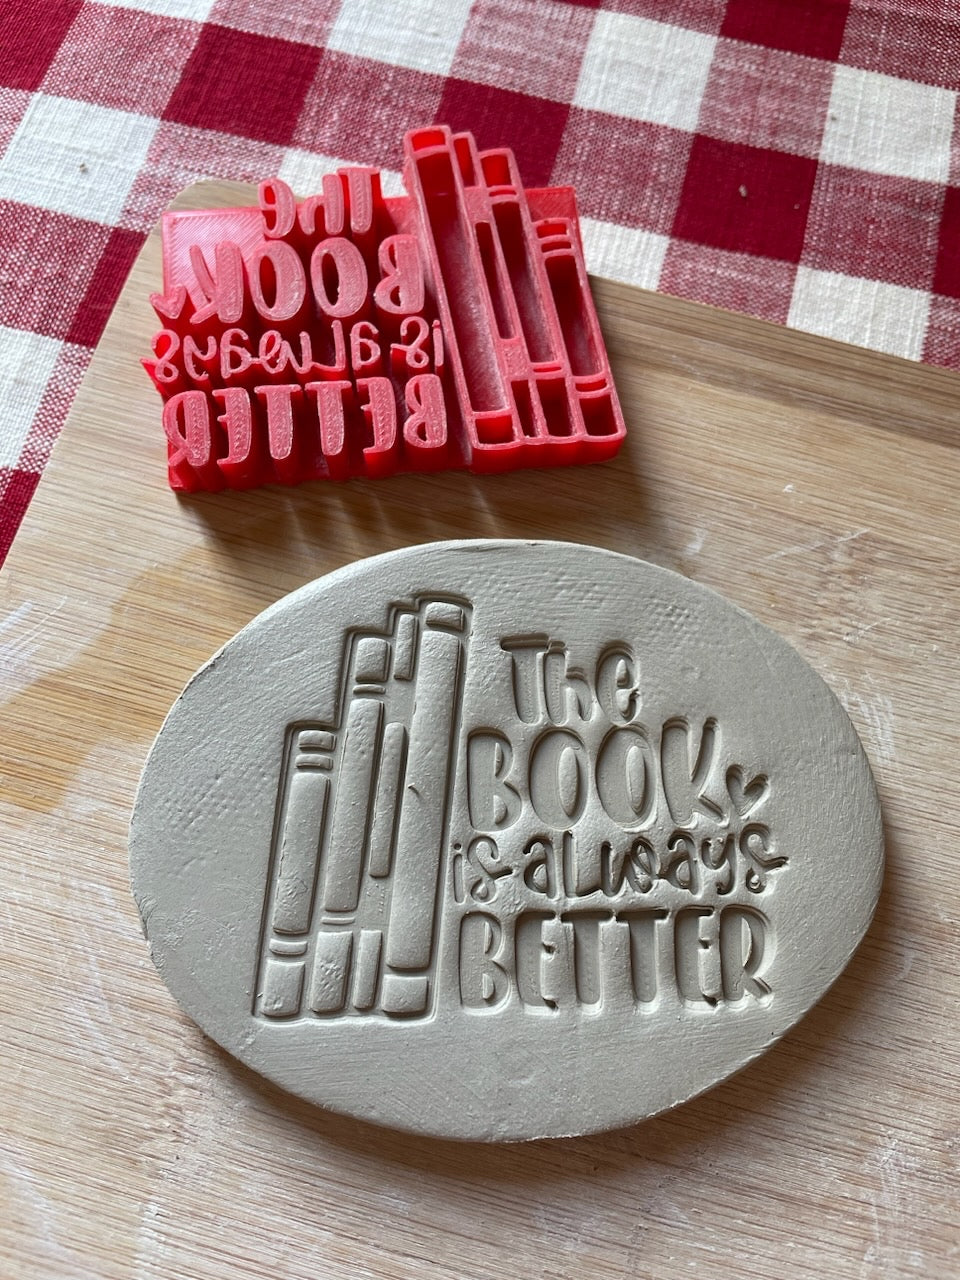 "The Book is Always Better" word stamp - plastic 3D design, multiple sizes available